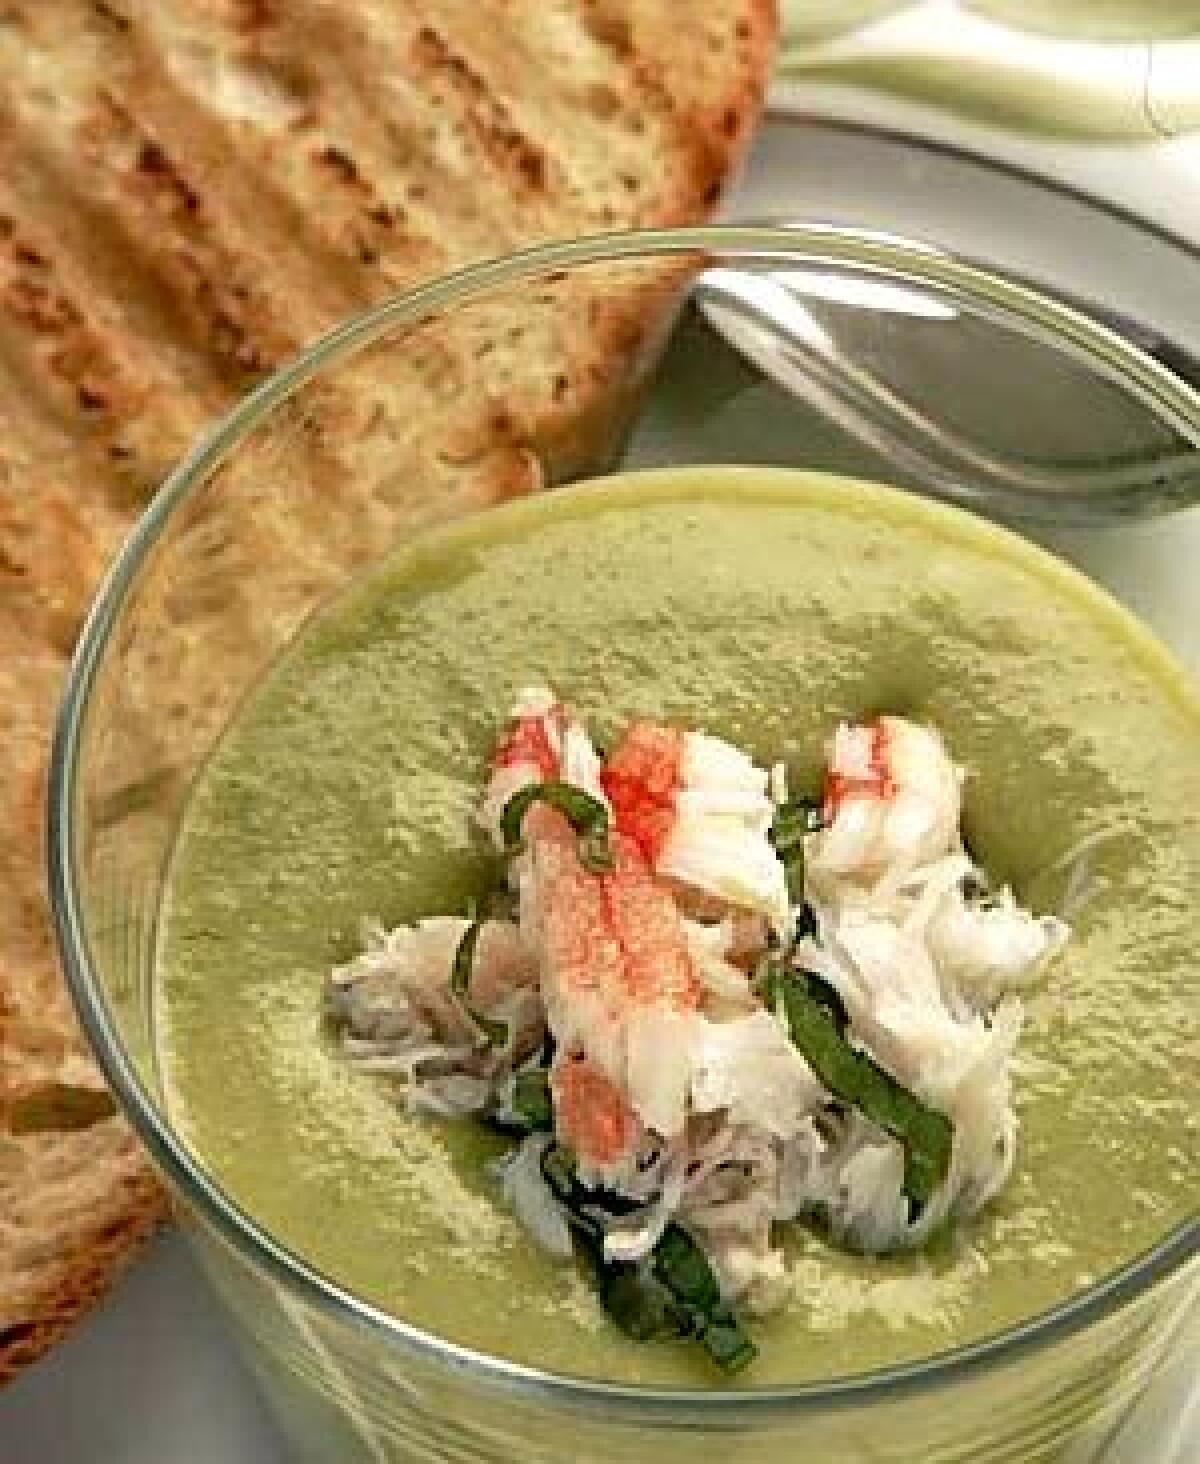 A silky chilled bisque of English peas is topped with crab and slivers of fresh mint.